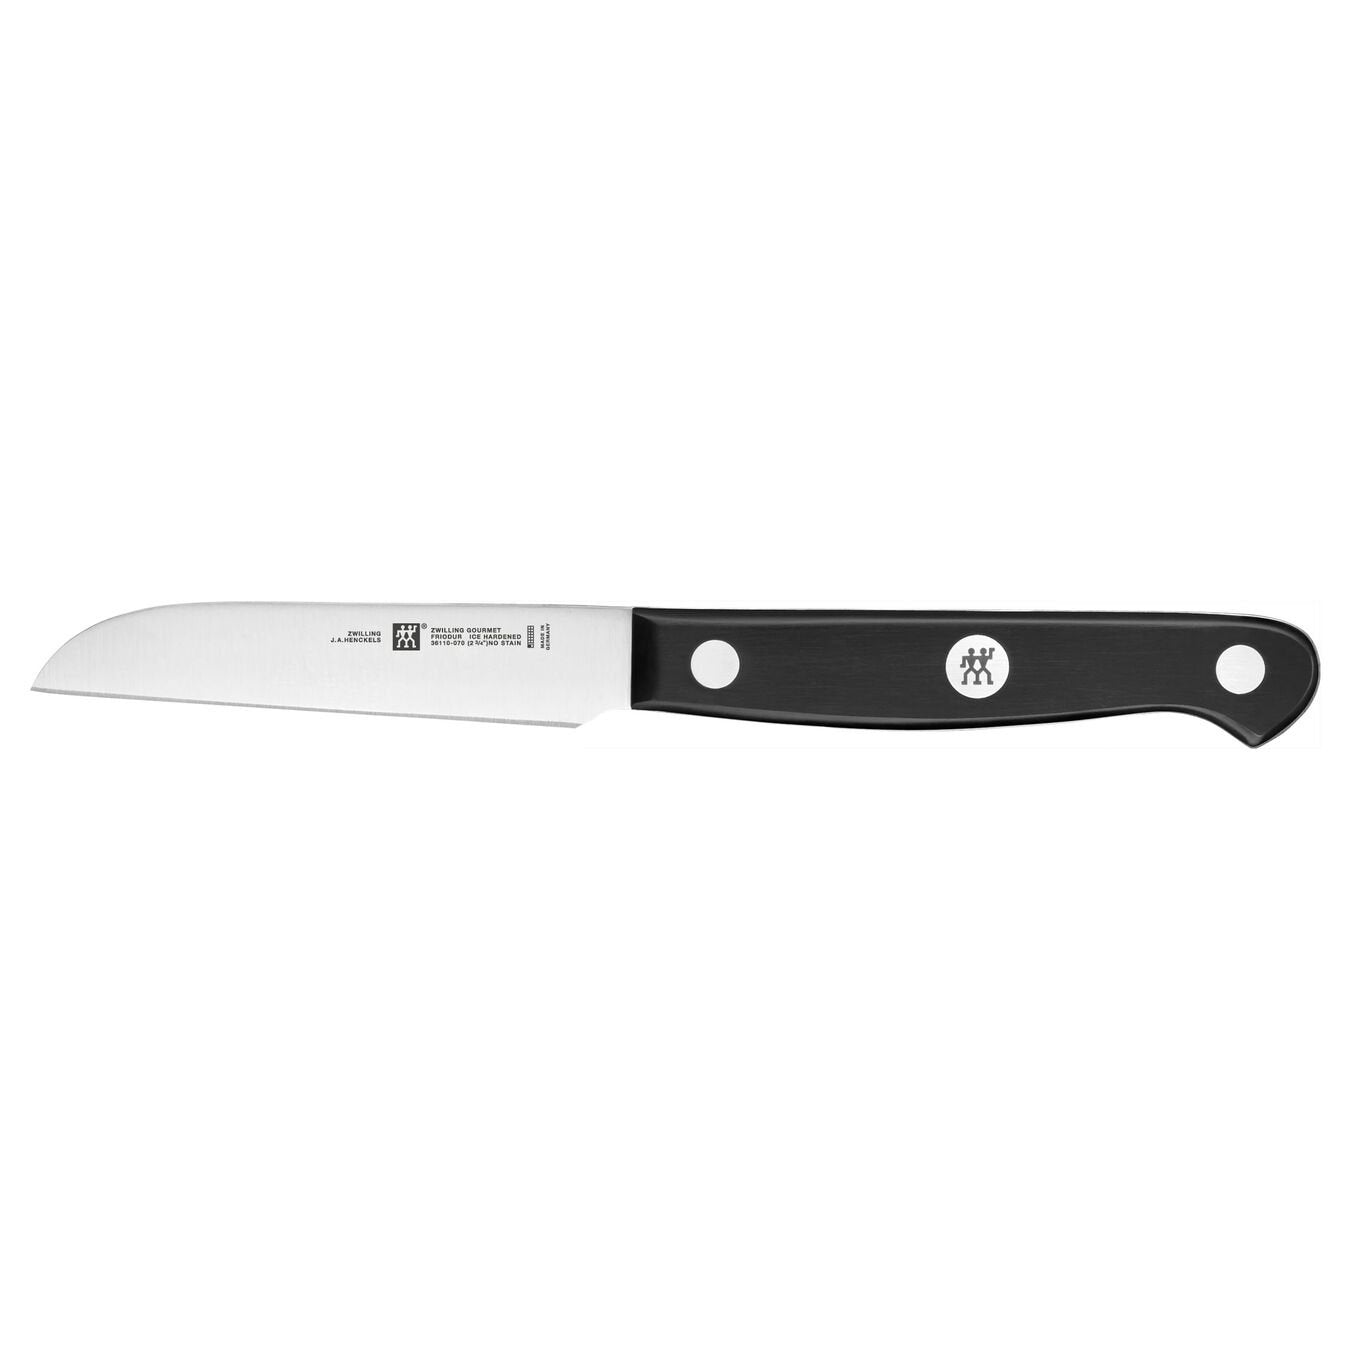 paring knife with riveted handle on white background